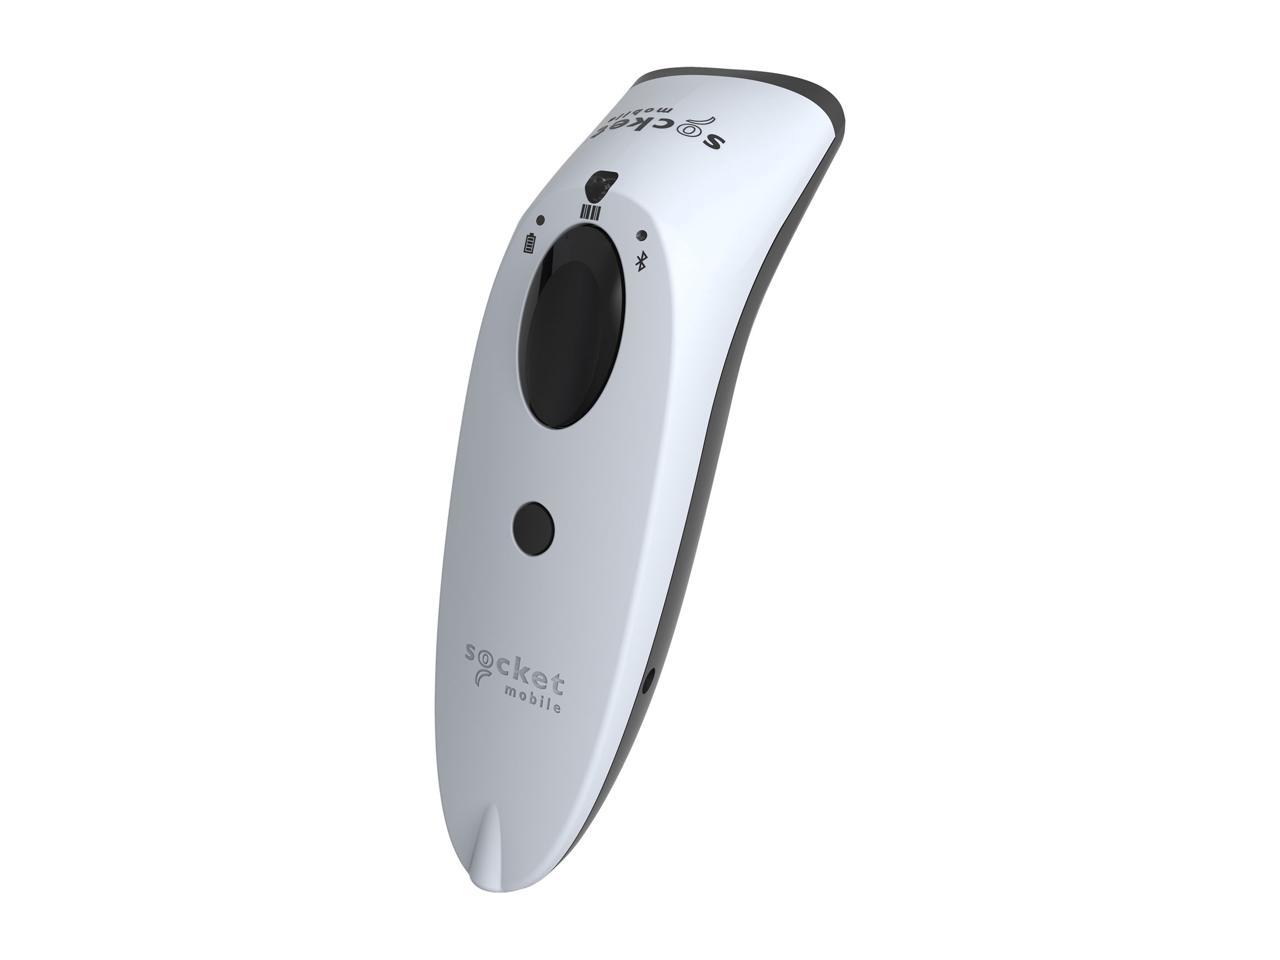 Socket Mobile SocketScan S700 1D Imager Barcode Scanner with Bluetooth,  White - CX3397-1855